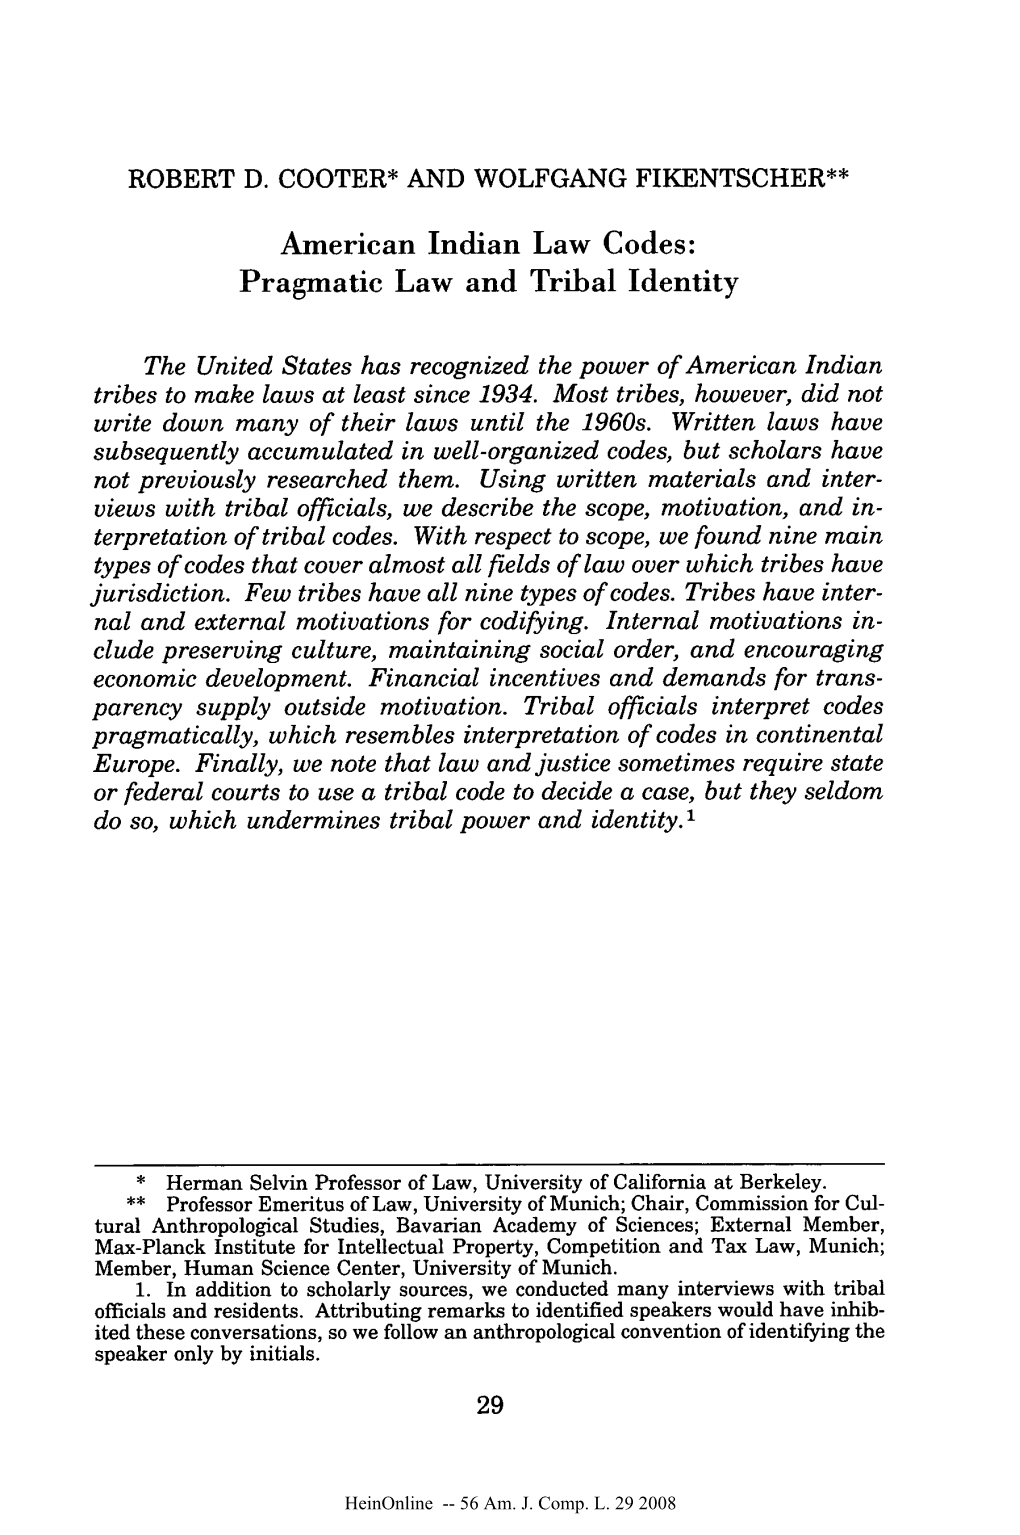 American Indian Law Codes: Pragmatic Law and Tribal Identity